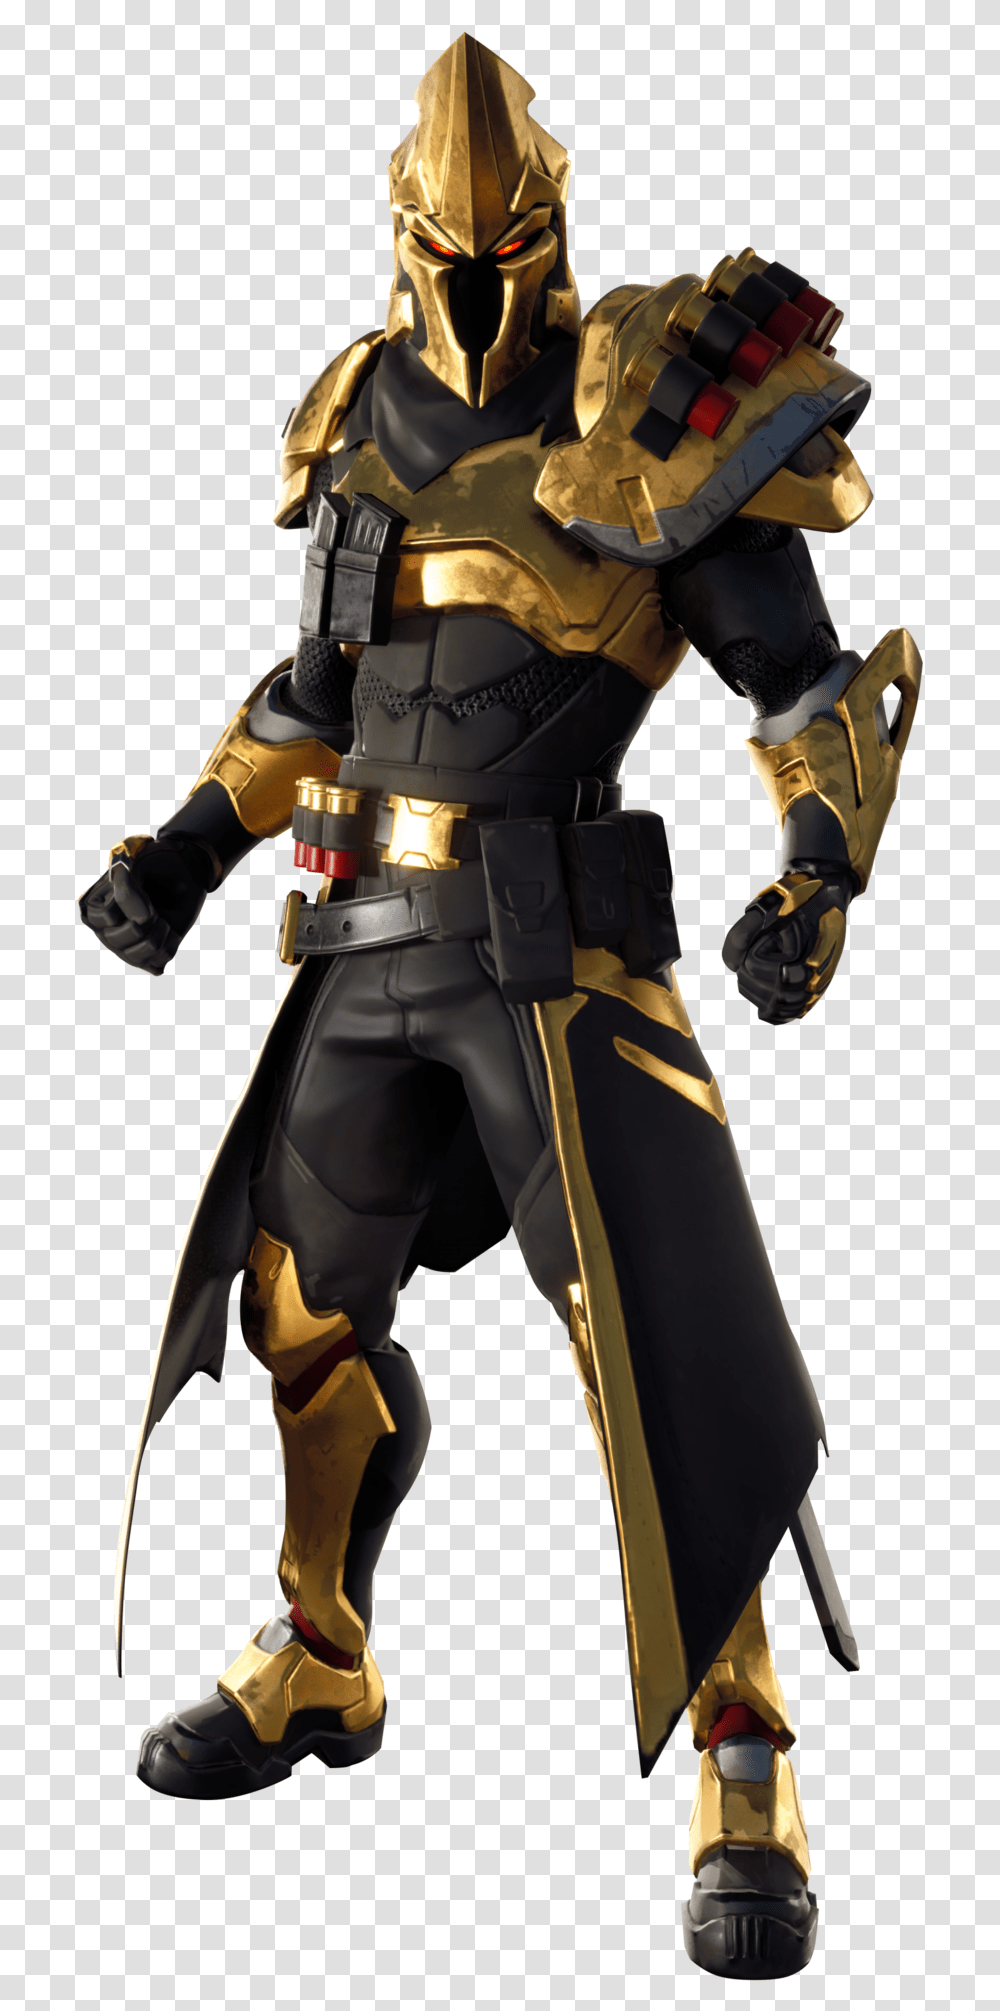 Ultima Knight Outfit Fortnite Season X Skins, Ninja, Costume, Overwatch Transparent Png